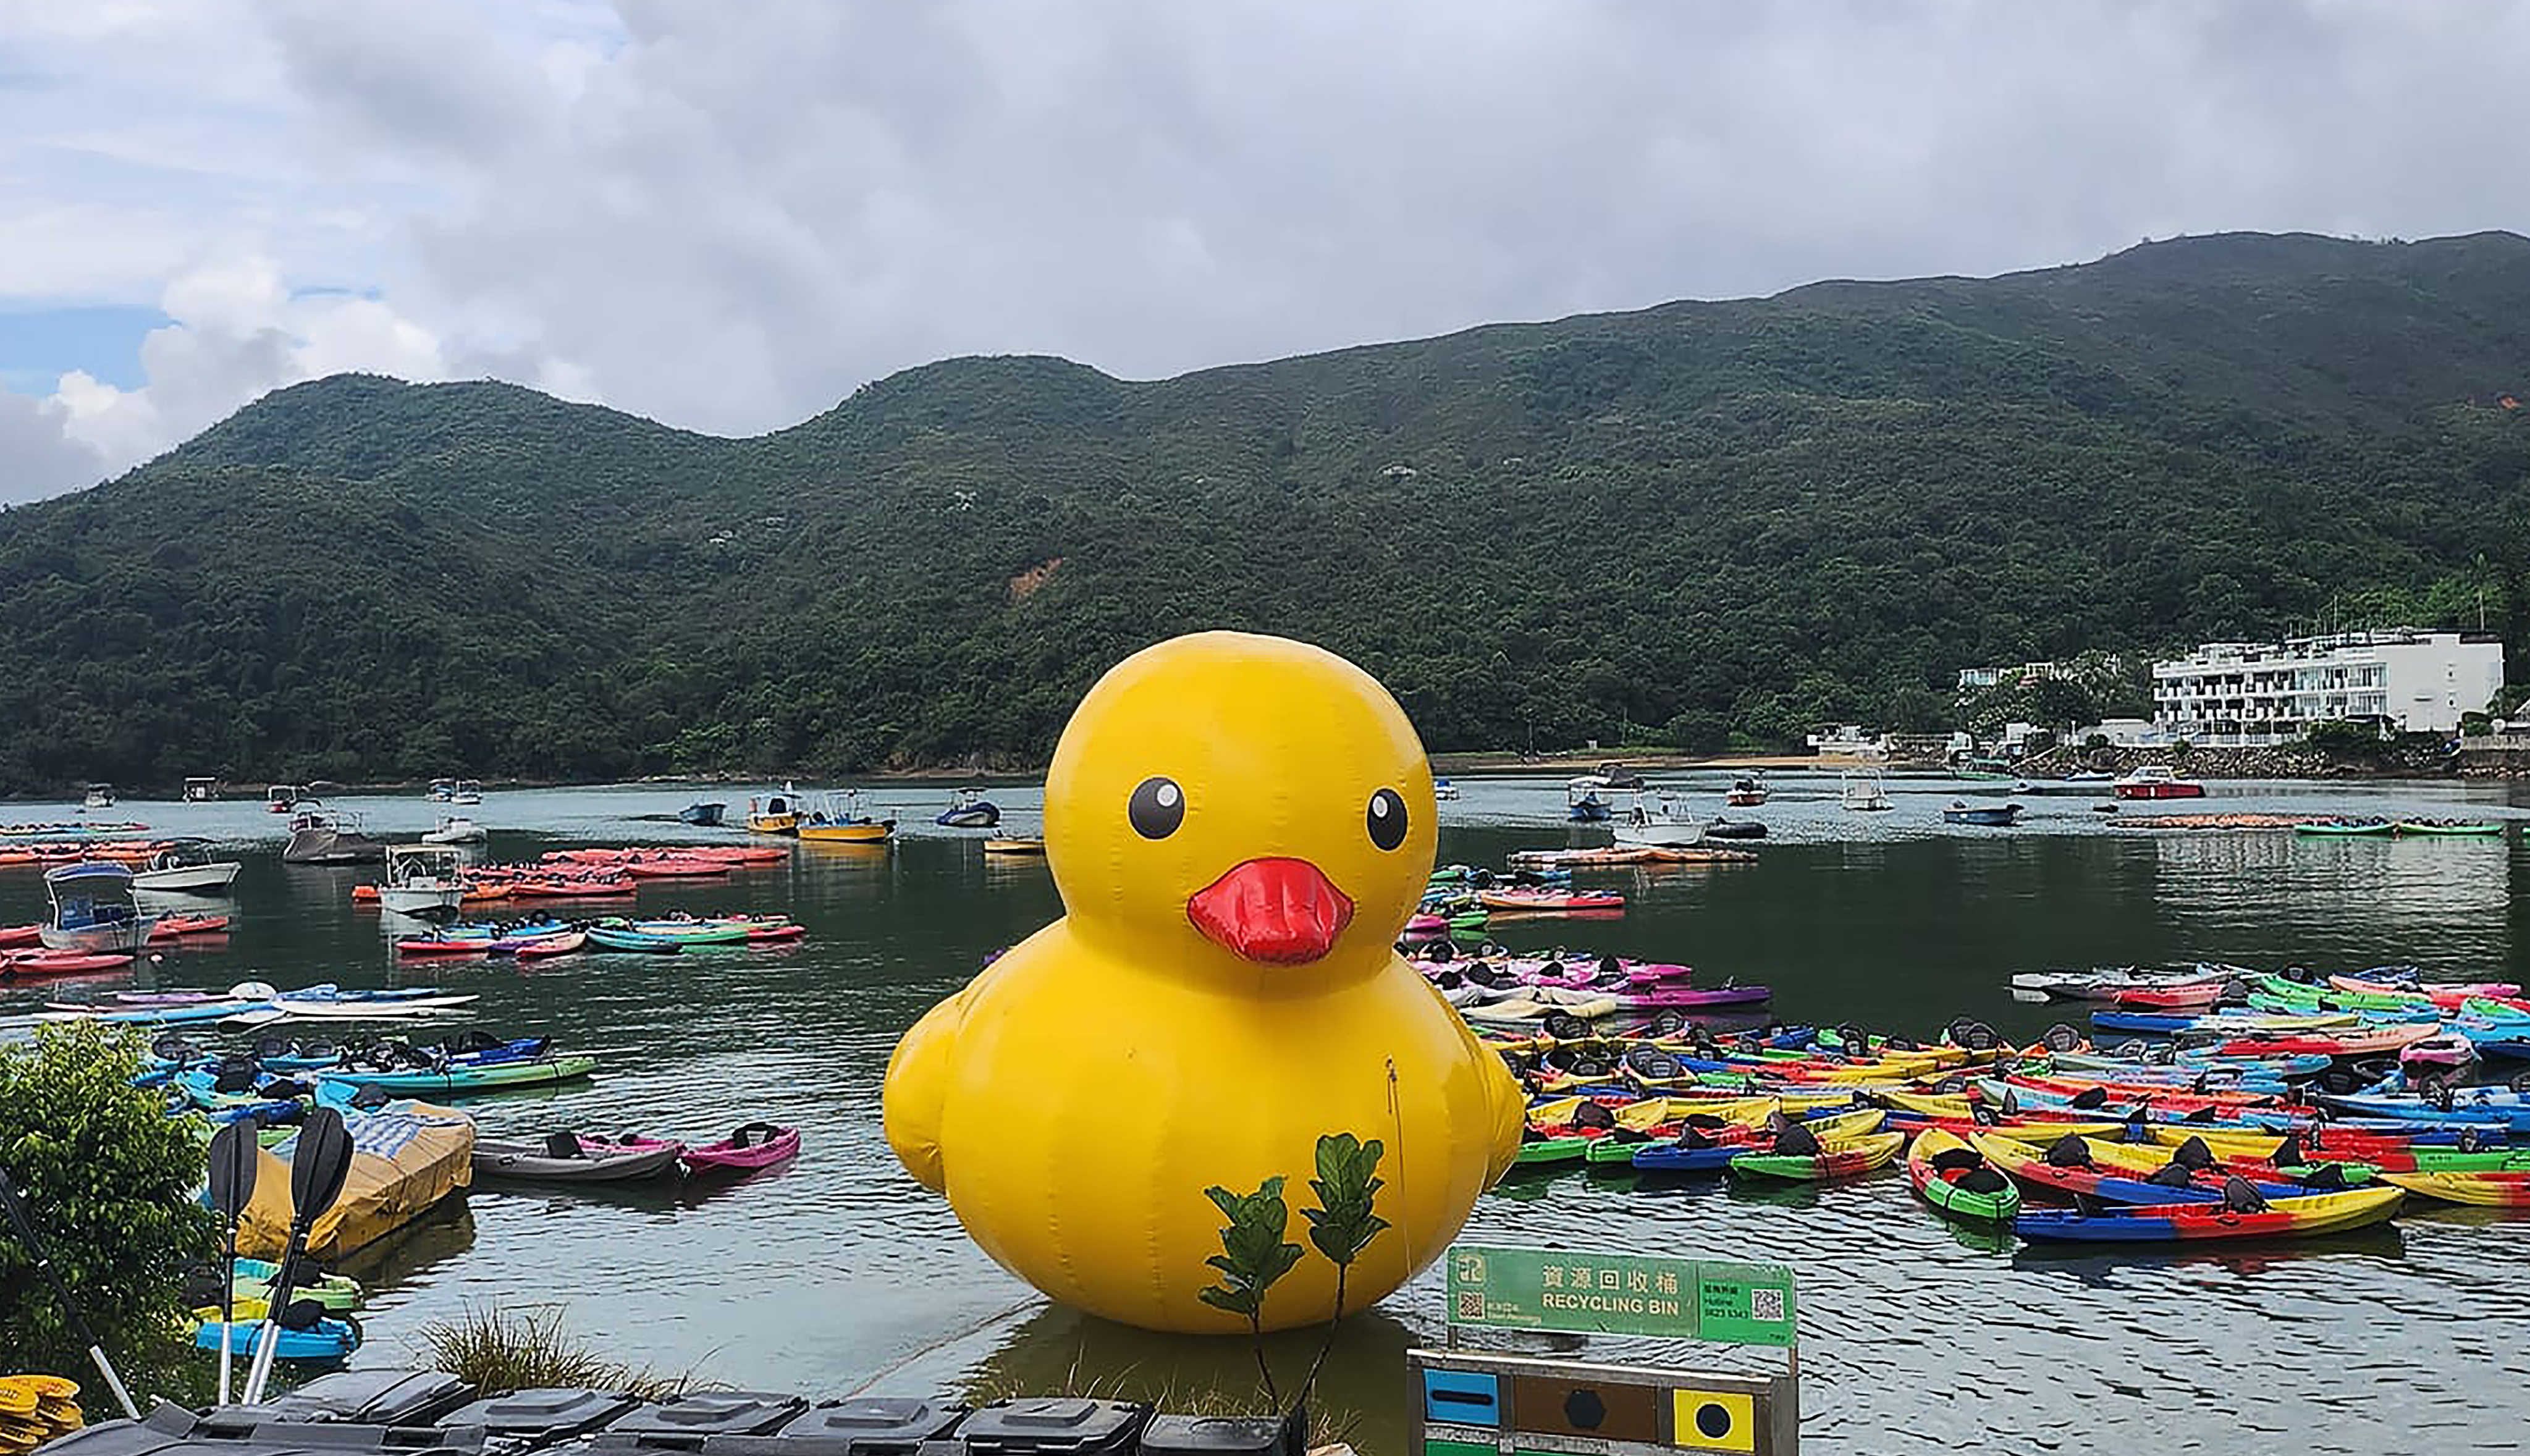 Owners of the giant rubber duck say they were told to remove the figure from waters off Sai Kung. Photo: Facebook/Green Egg Island Canoe and Kayak Rental